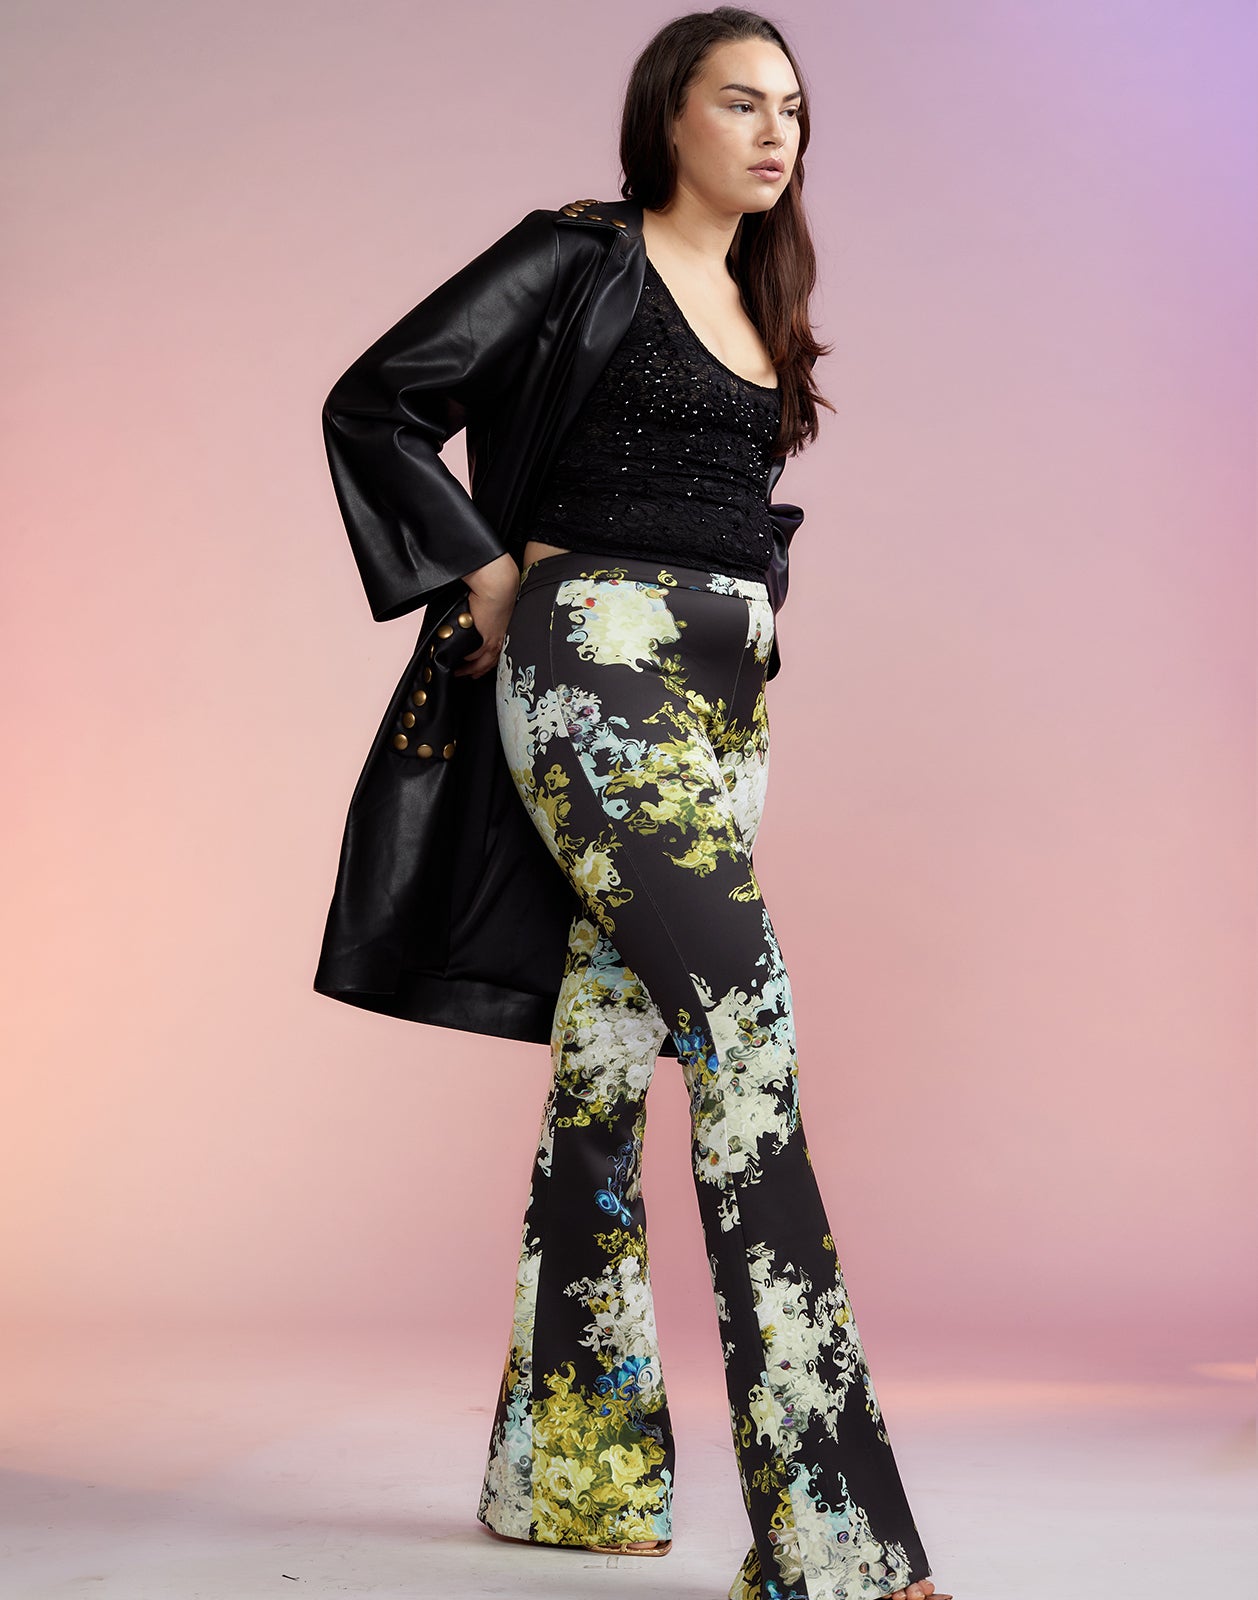 Bonded Fit and Flare Pant